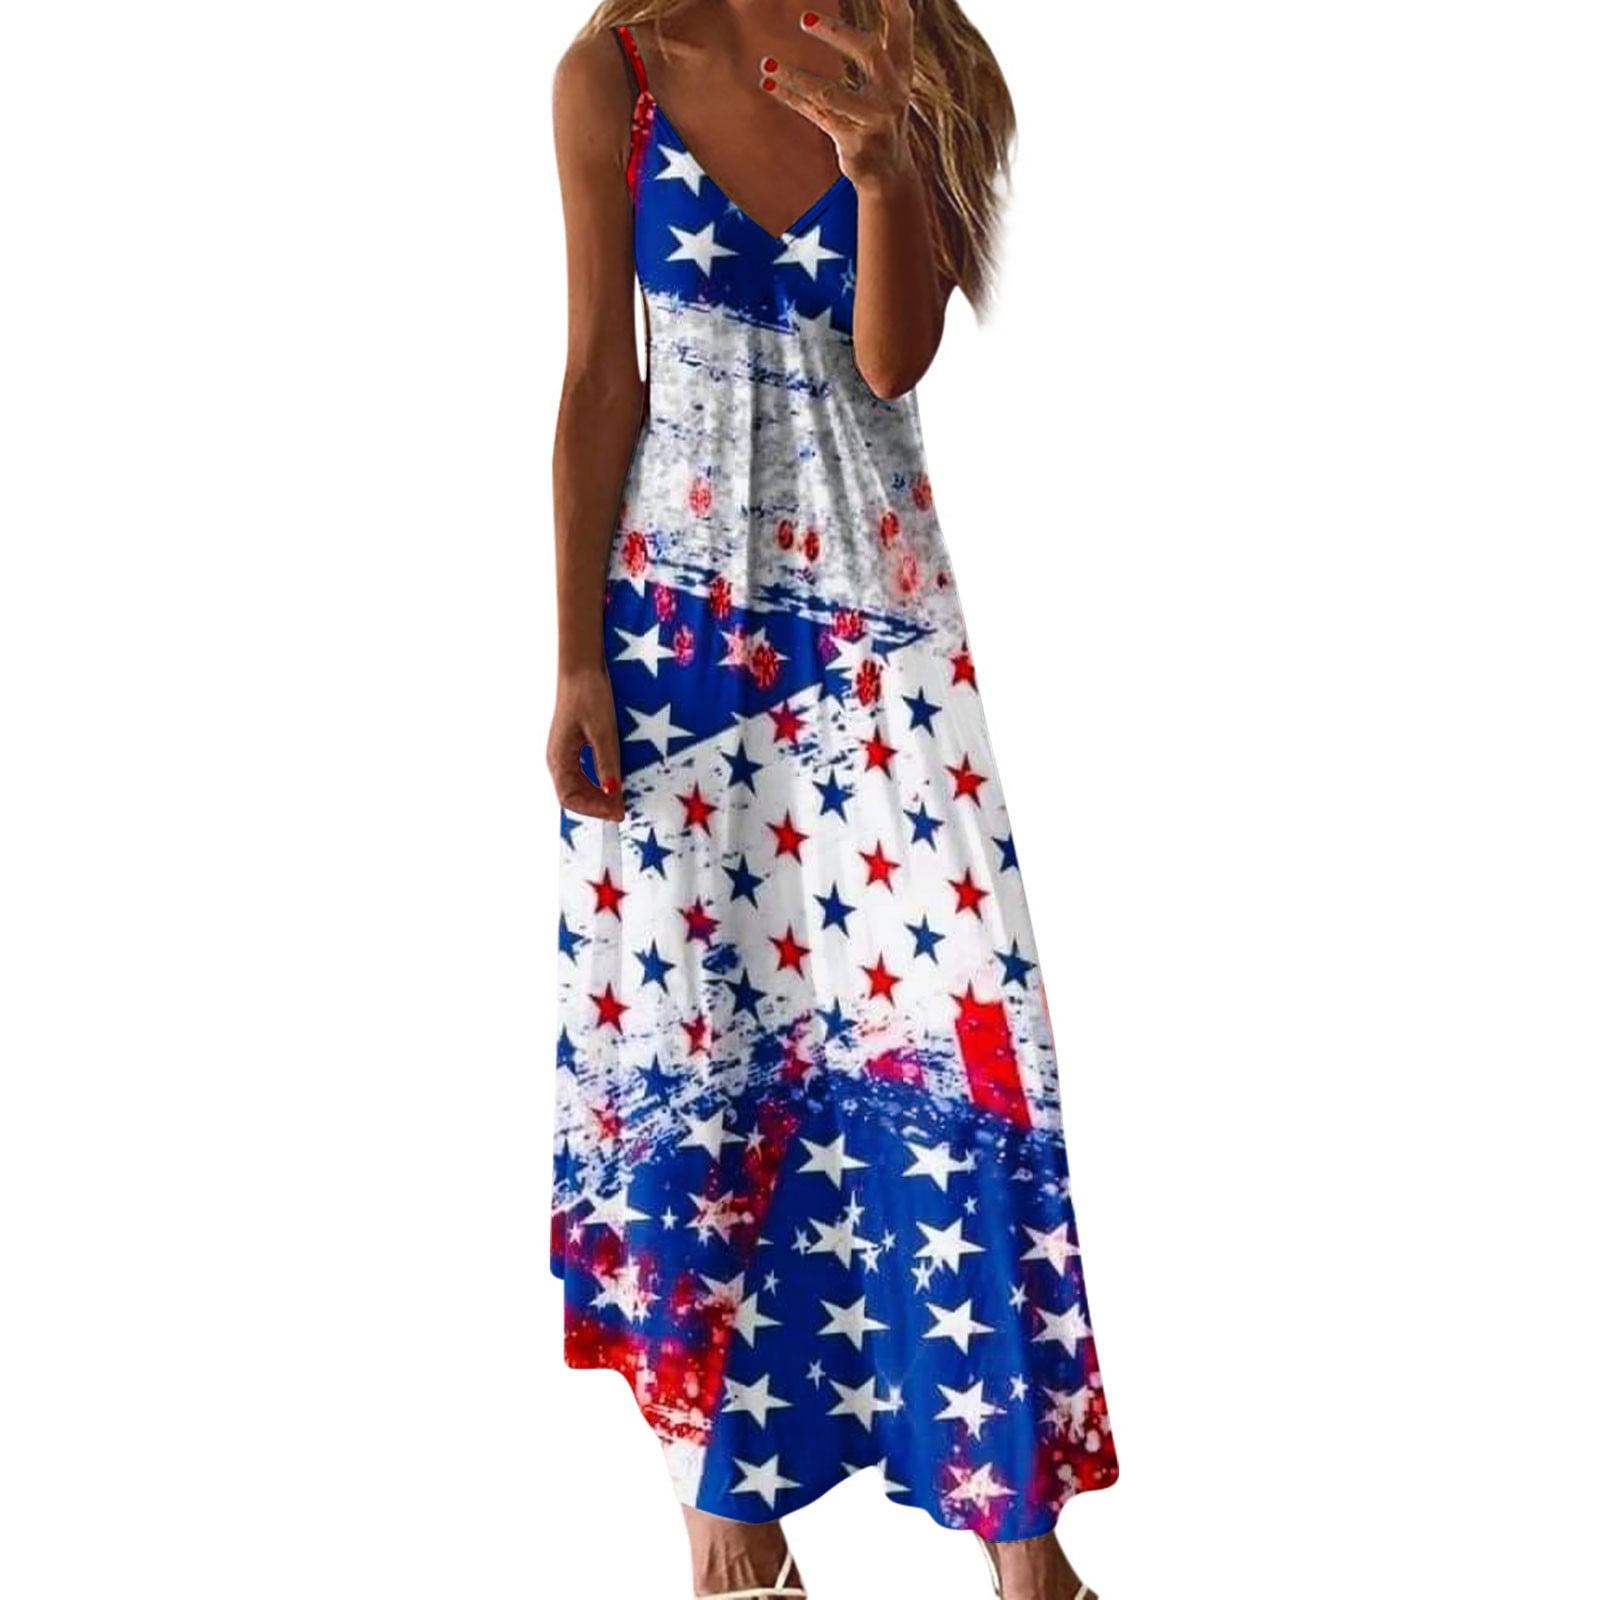 REORIAFEE Womens 4th of July Flag Floral Print Dress Sundress Plus Size ...